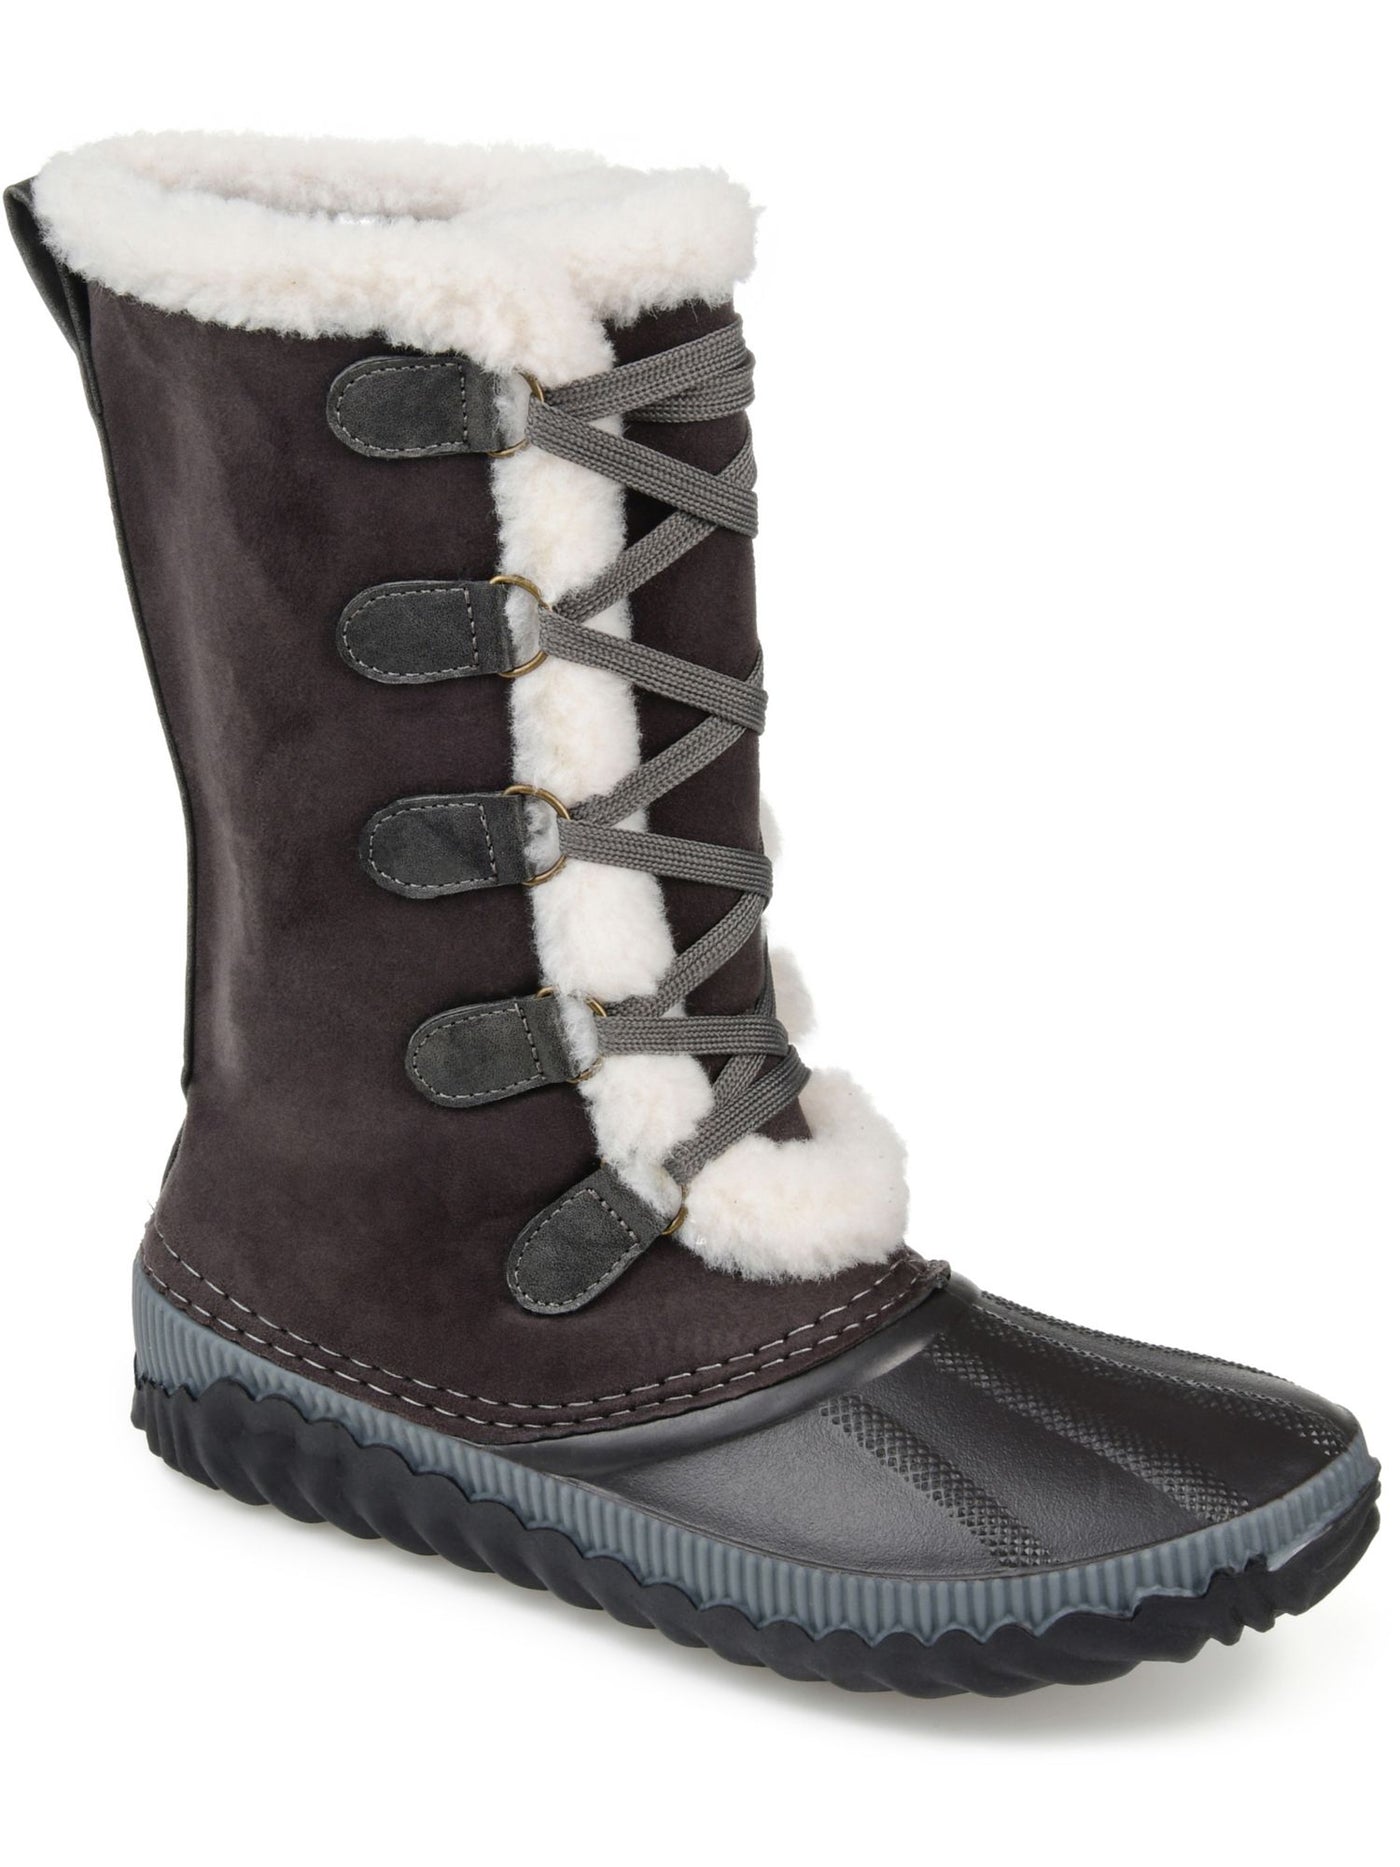 JOURNEE COLLECTION Womens Gray Two-Toned Insulated Waterproof Round Toe Lace-Up Snow Boots 6